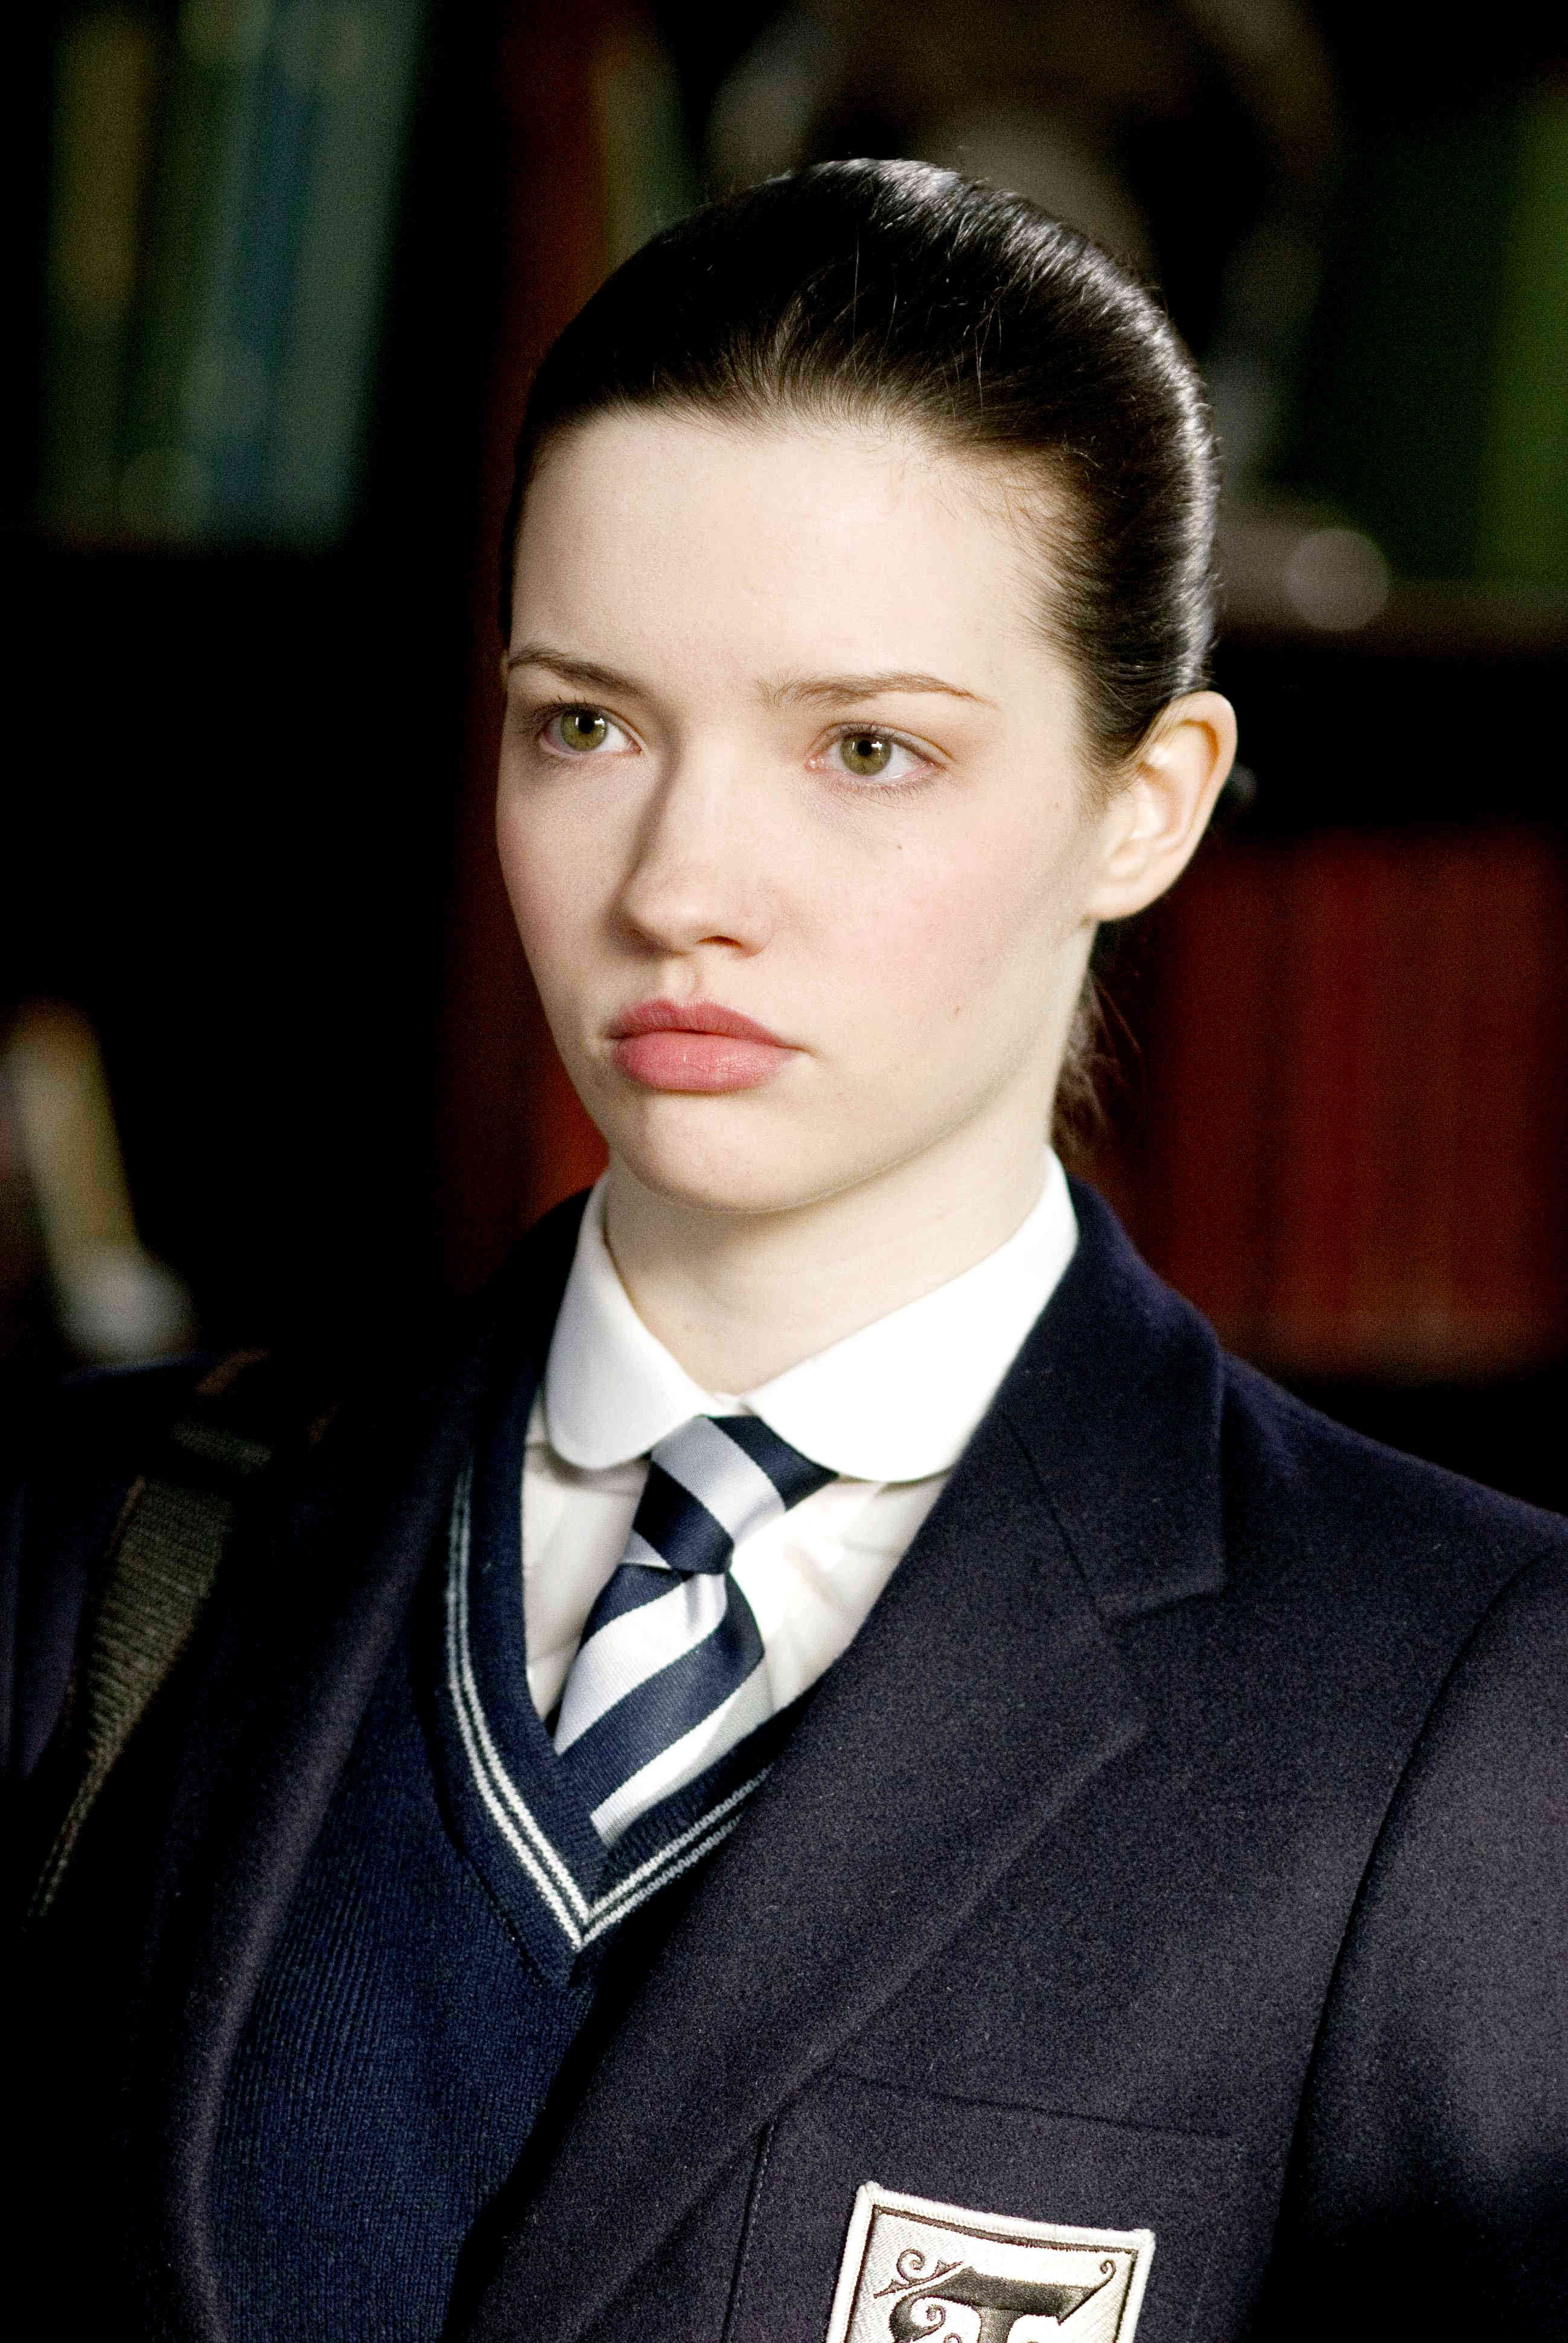 Talulah Riley stars as Annabelle Fritton in NeoClassics Films' St. Trinian's (2009)